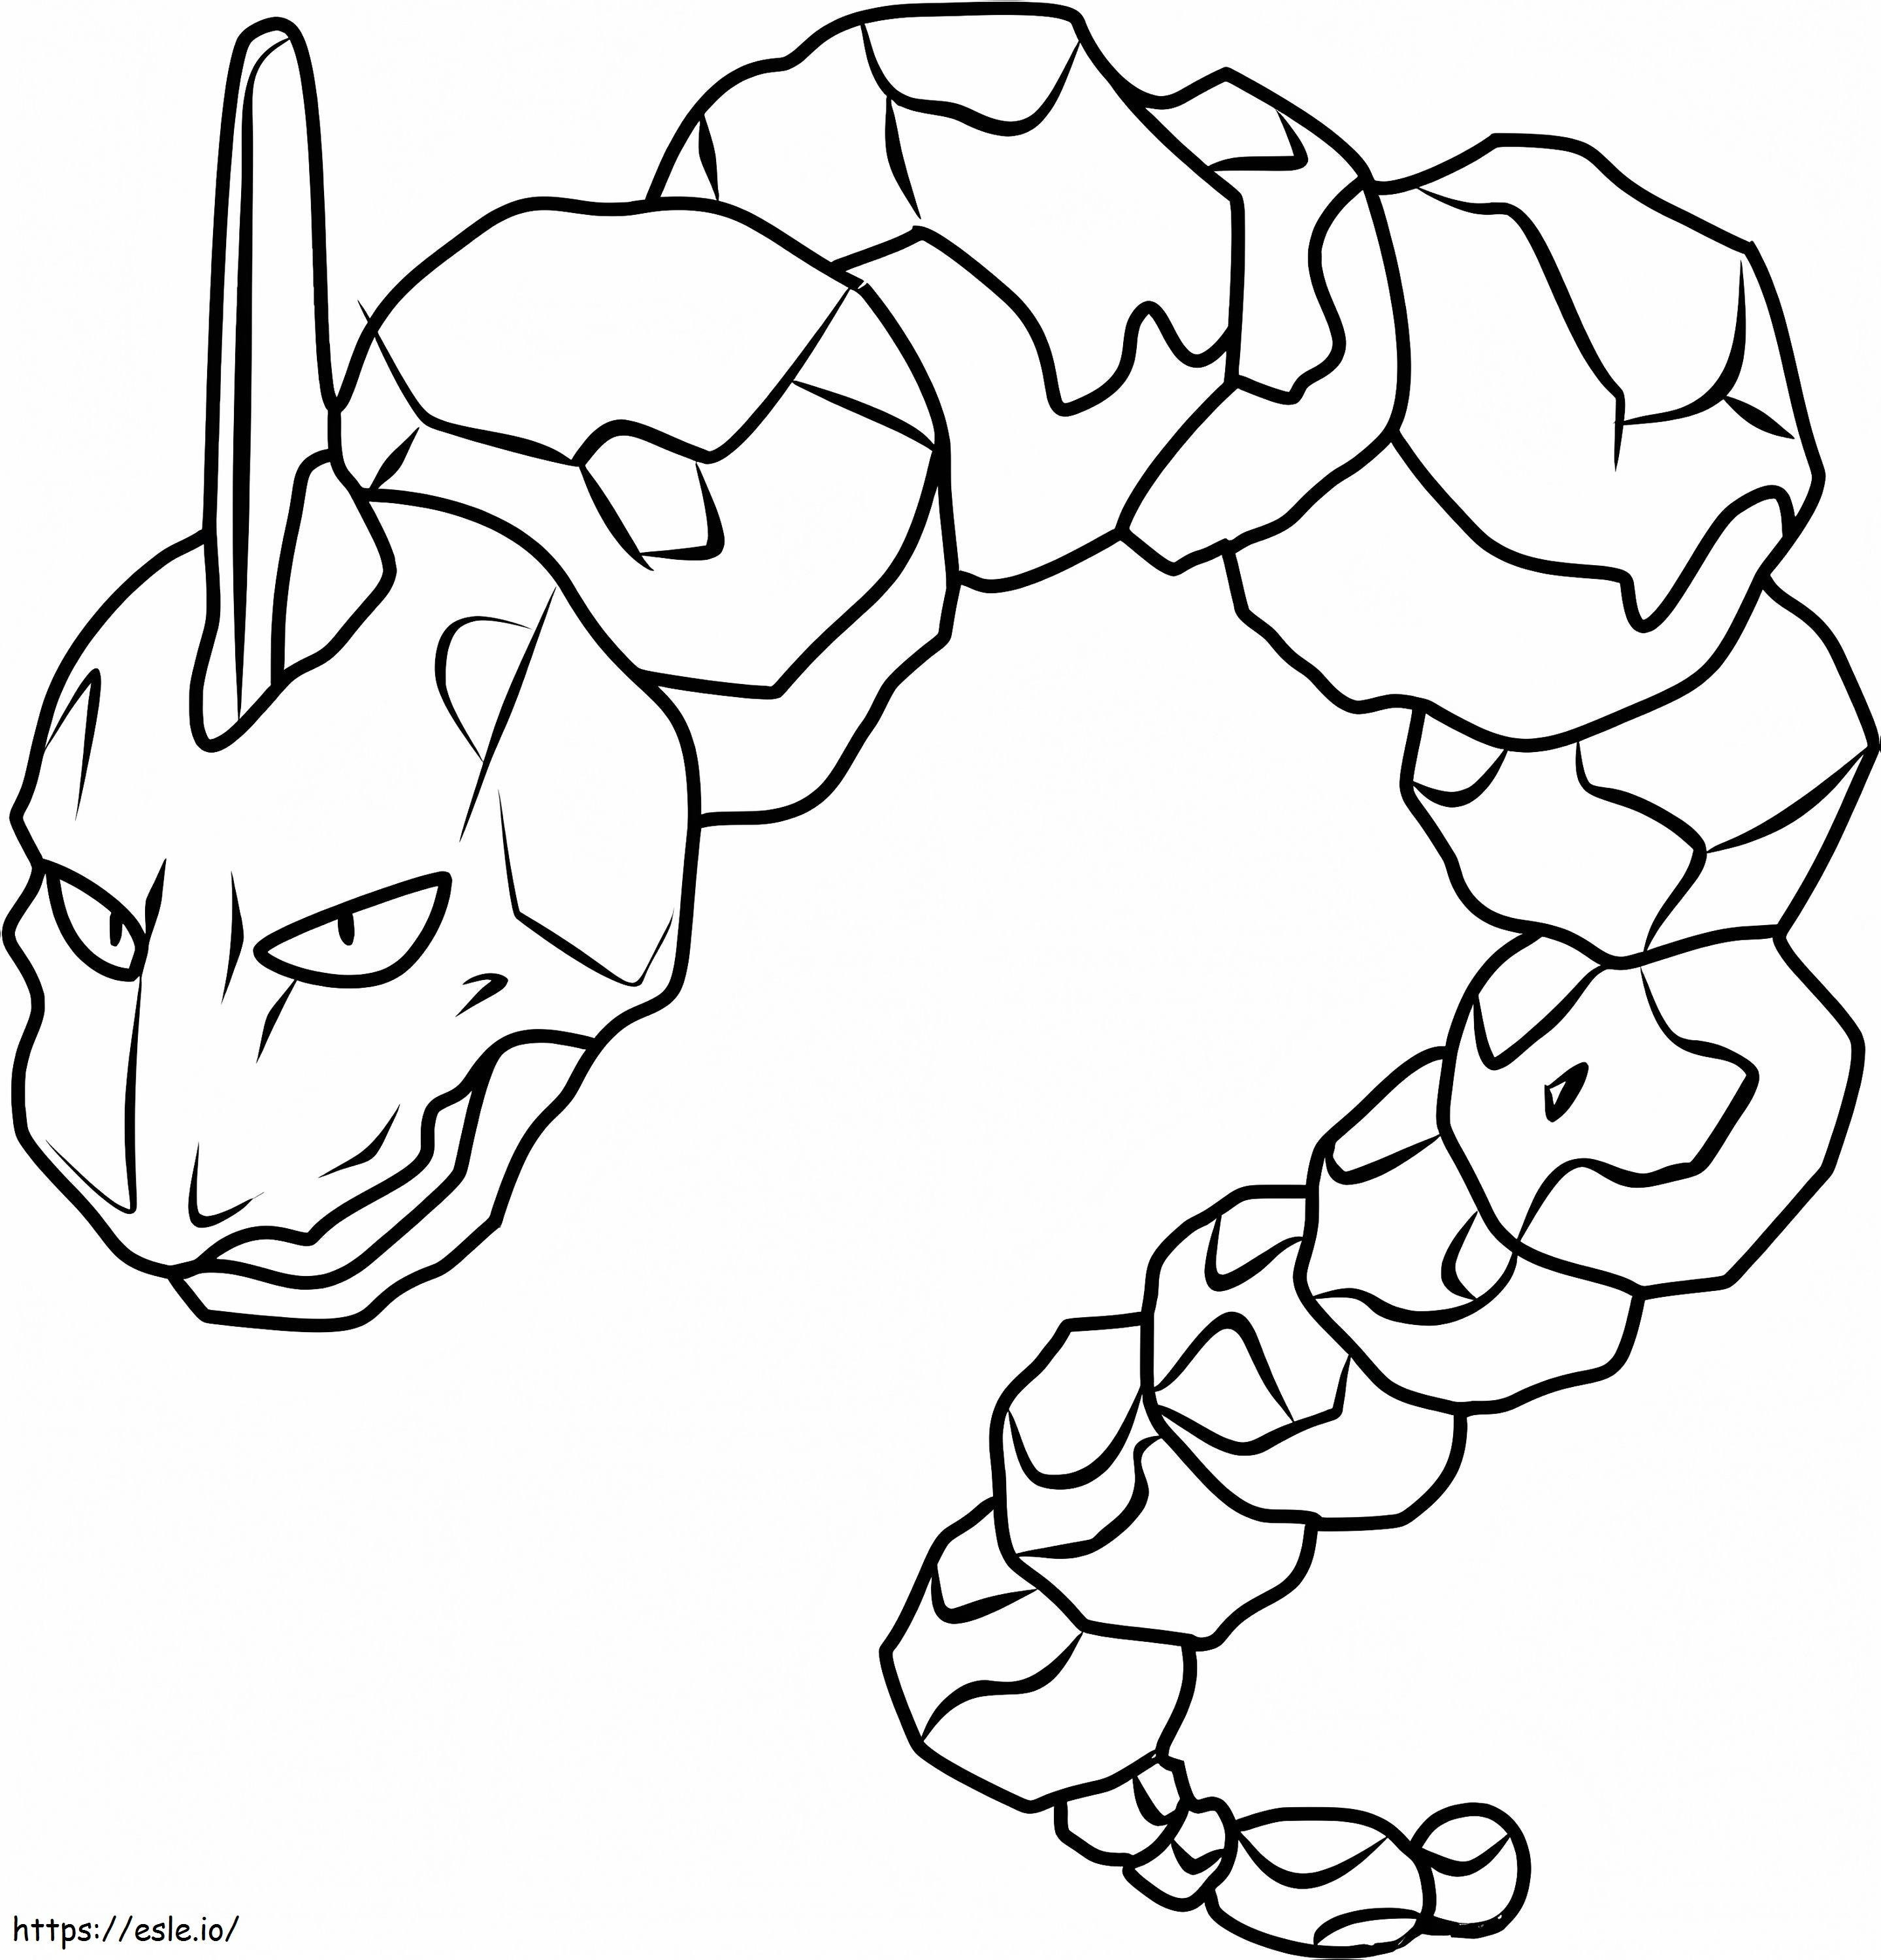 Onix 2 coloring page